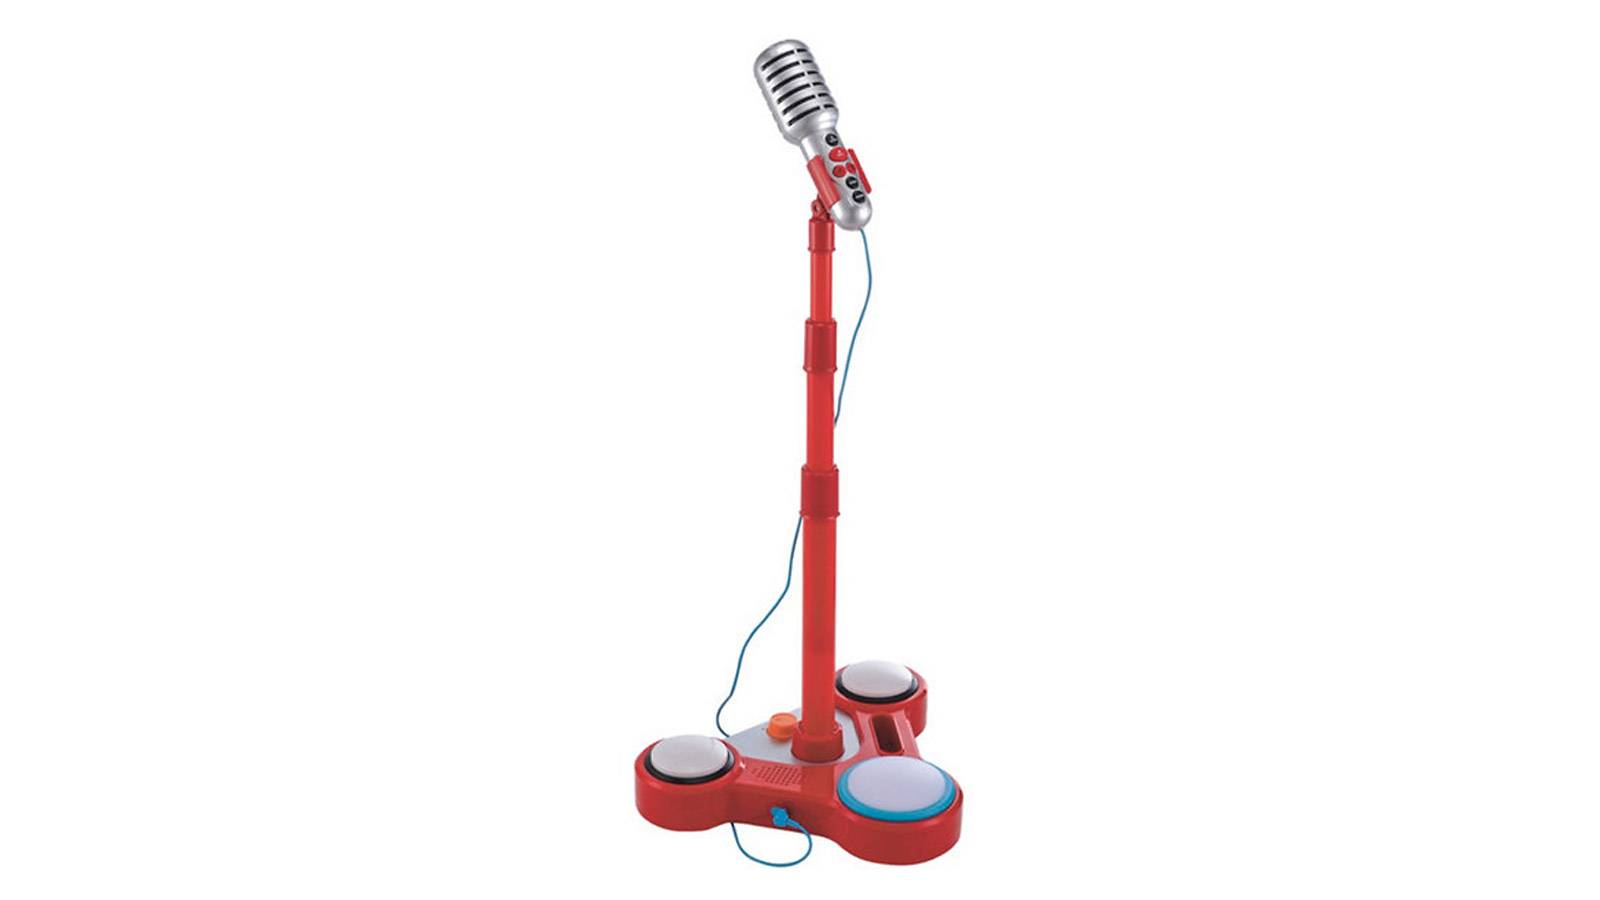 Tots-BUYER'S-GUIDE-9-best-role-playing-toys-for-toddlers-ELC-MICROPHONE